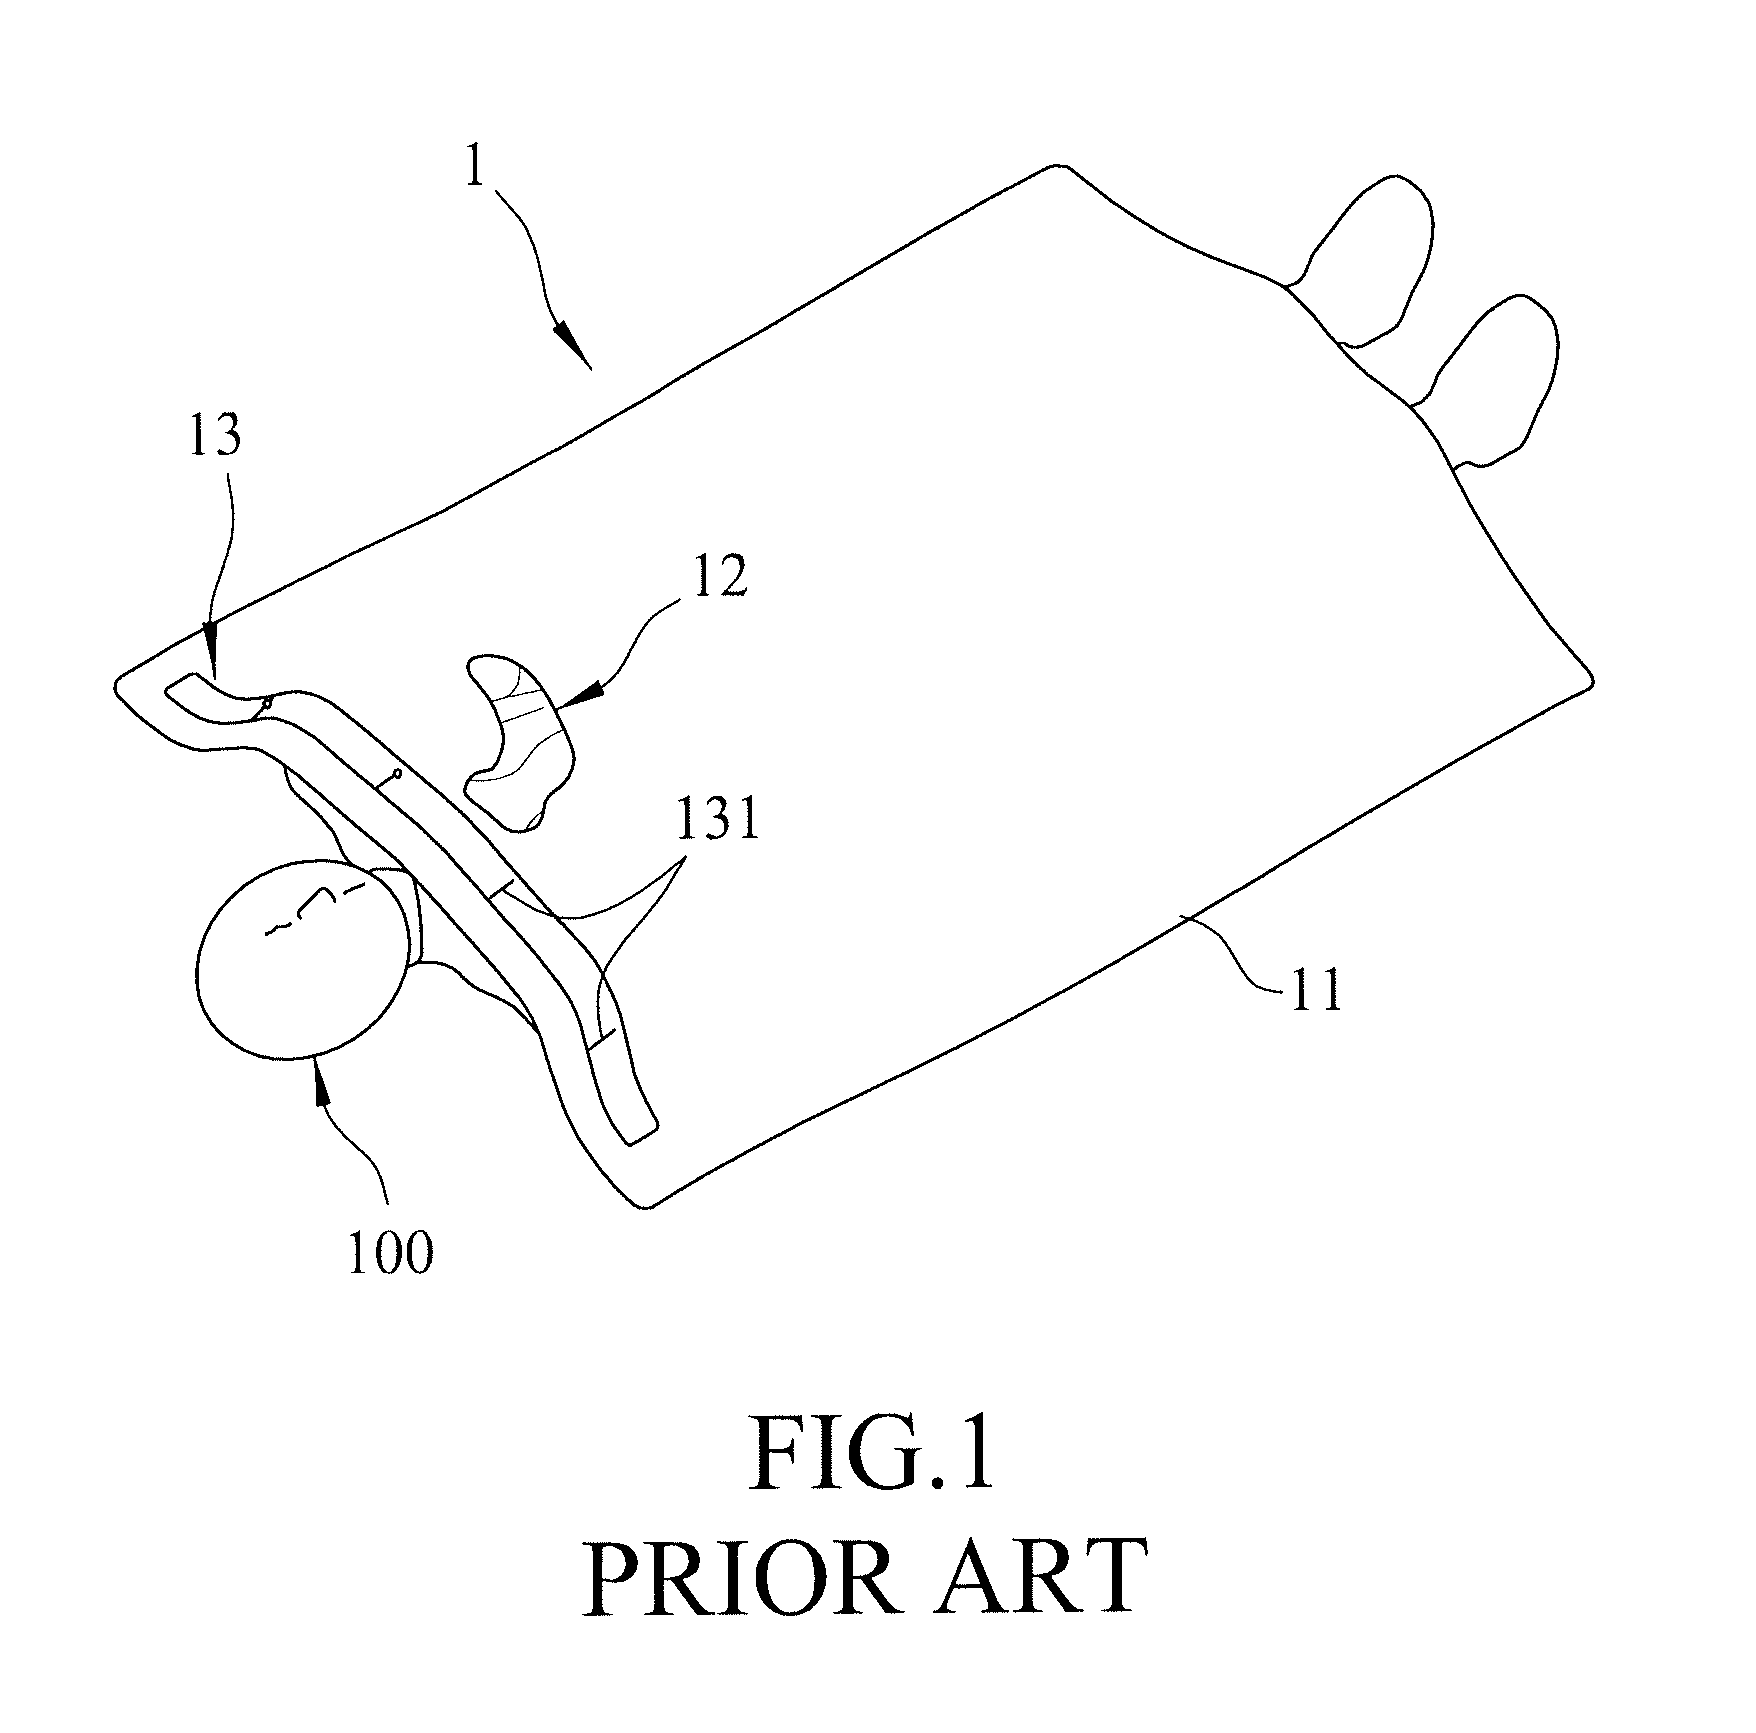 Accessory device for twelve-lead electrocardiography apparatus